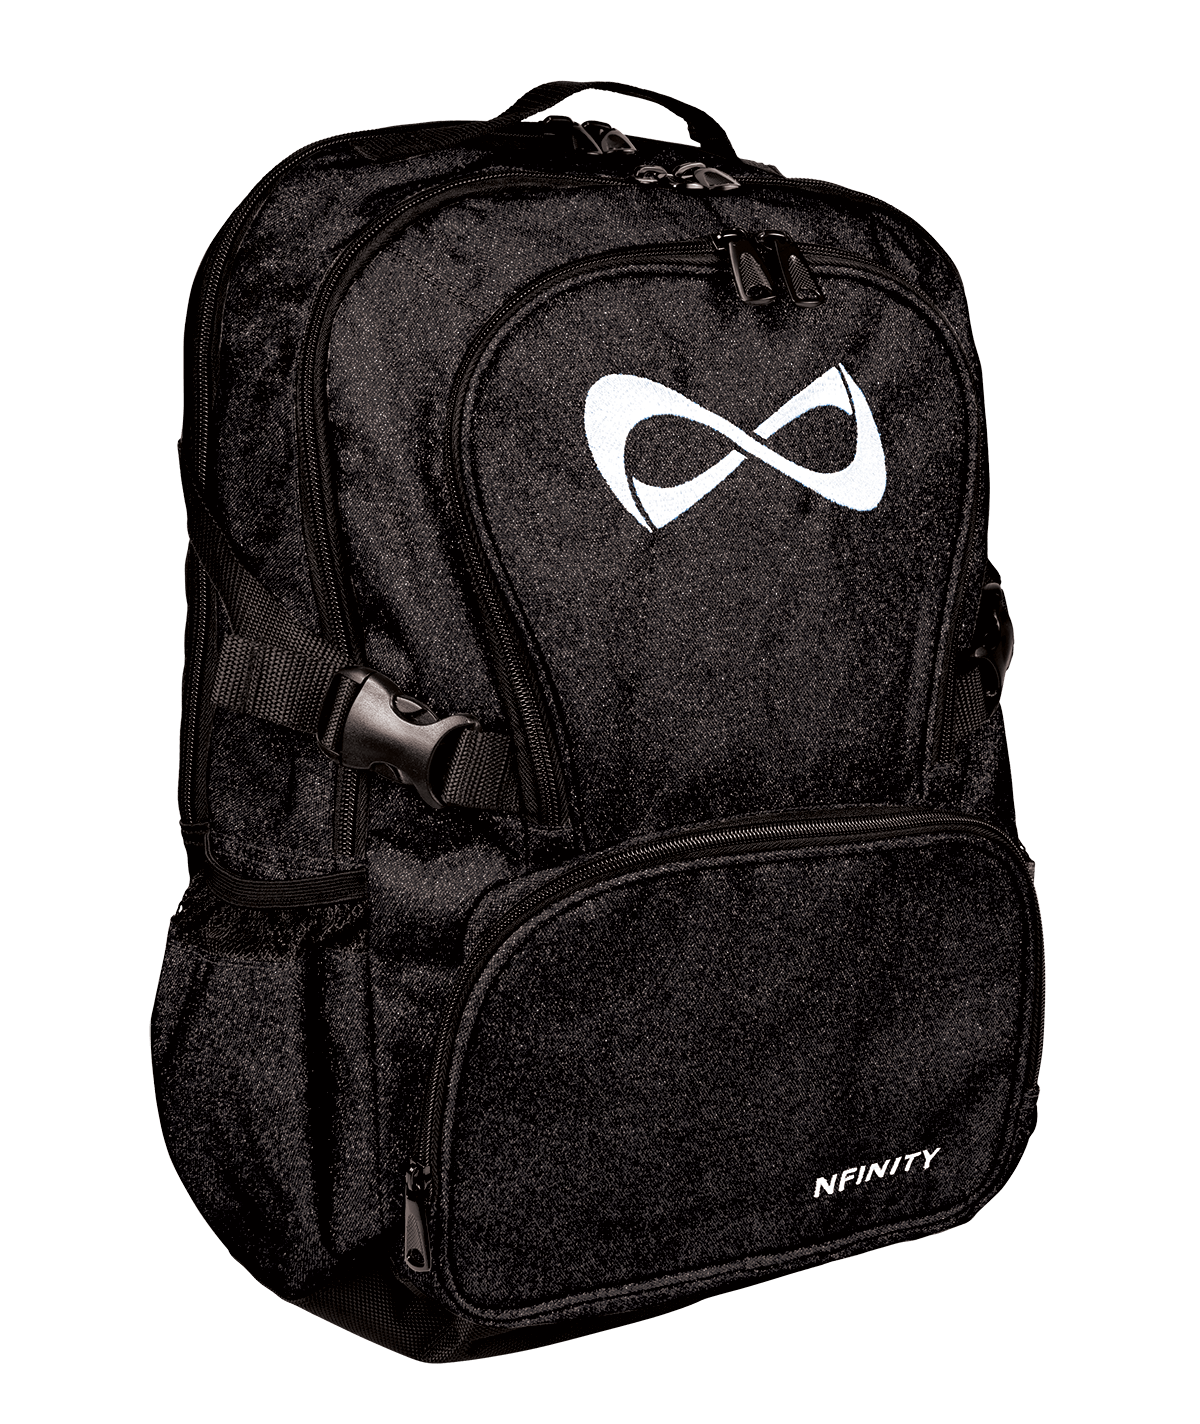 nfinity backpack cheap